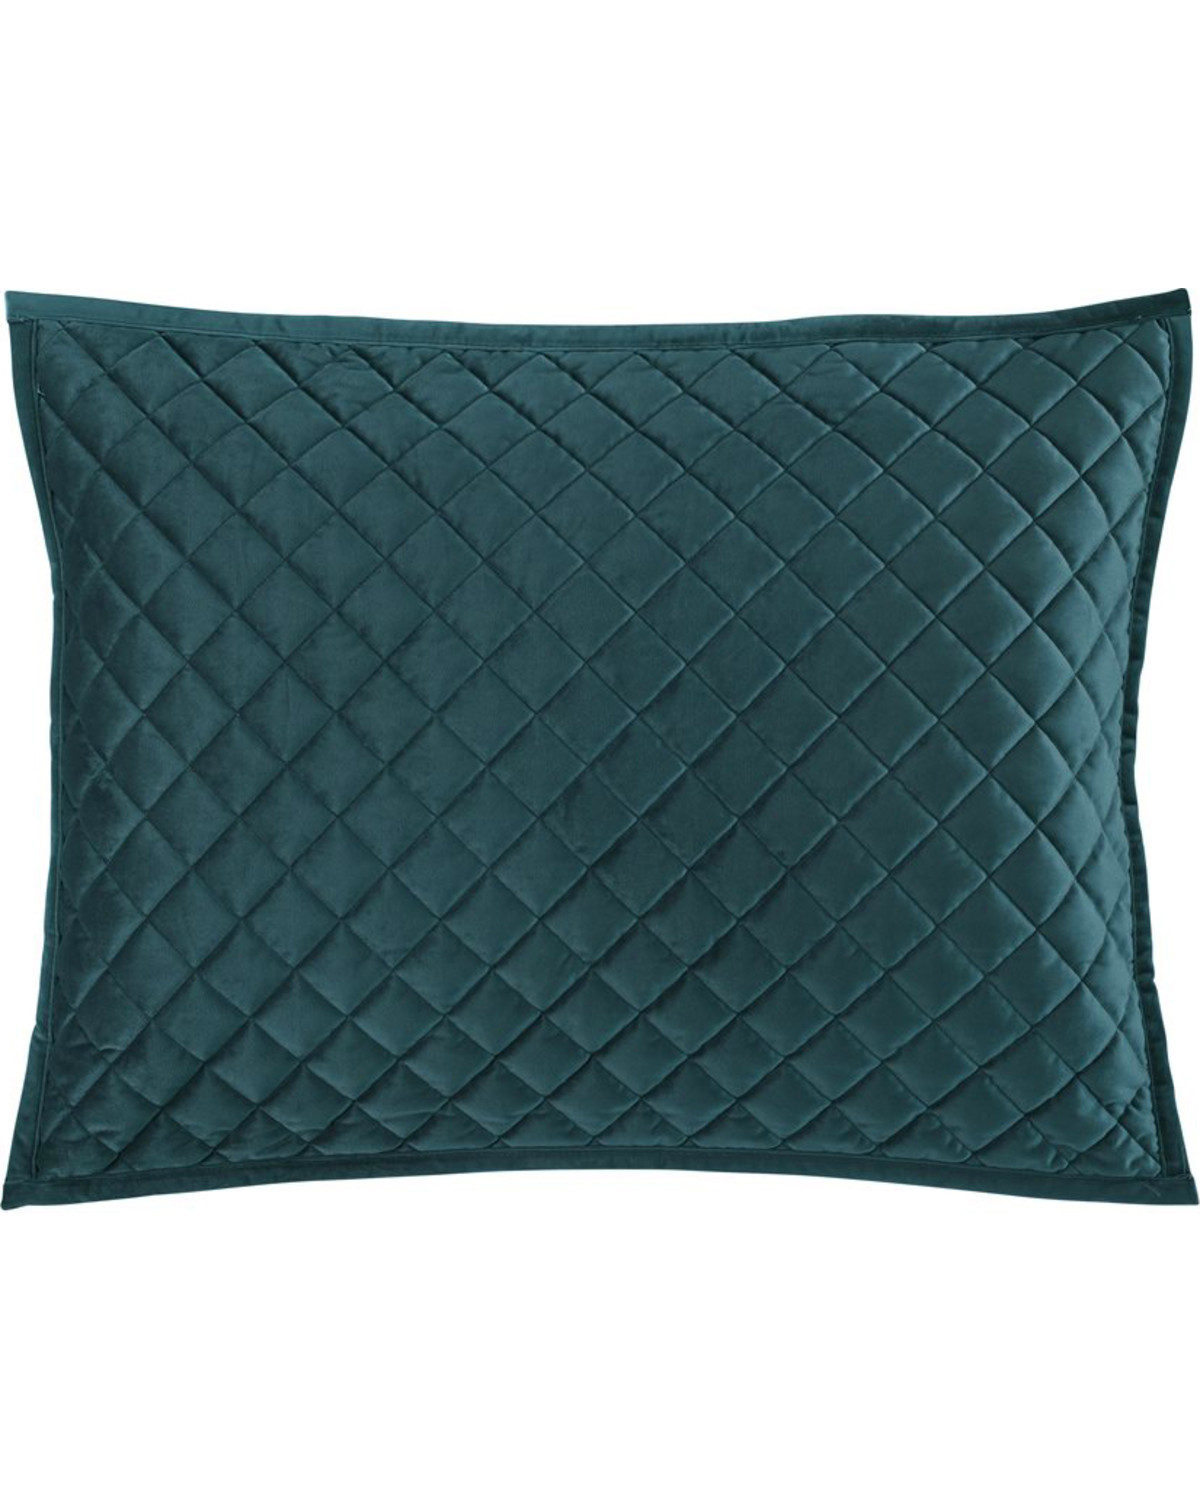 HiEnd Accents King Teal Diamond Quilted Shams